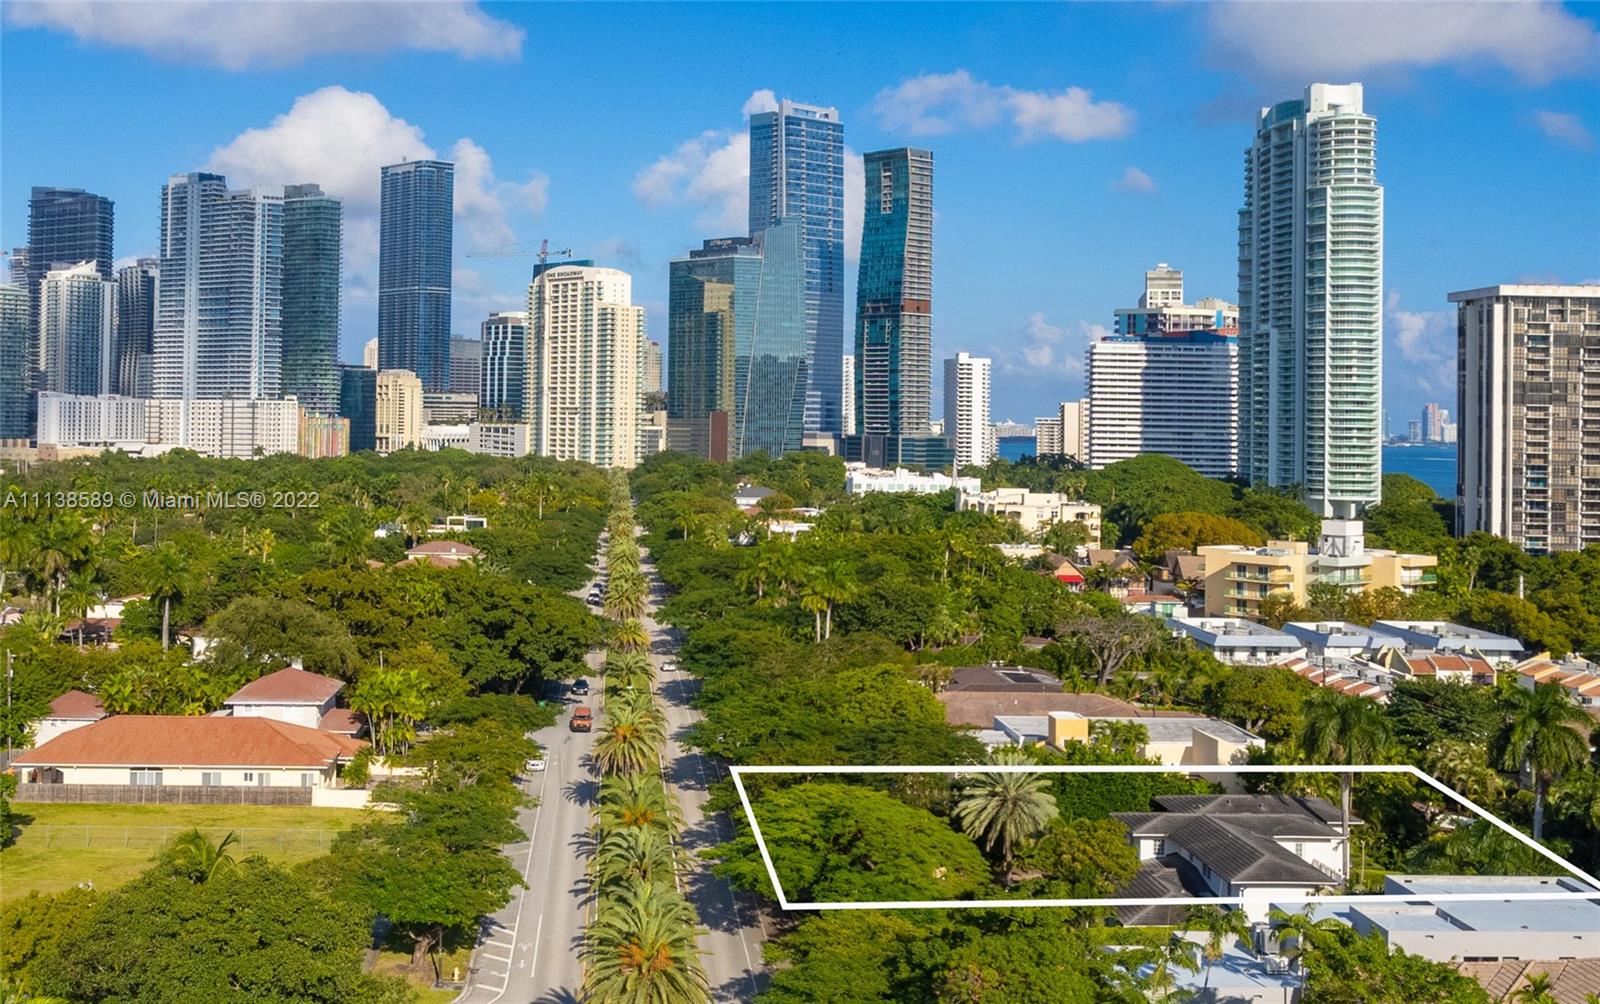 Rare find on historic South Miami Ave - Miami’s prime residential address prized for its central location walkable to urban Brickell, Alice Wainwright Park, Vizcaya Museum, and a quick drive to Coconut Grove, Coral Gables, and Key Biscayne. Sprawled on a DOUBLE lot of 17,000-SF, this 5,030-SF home has 8 bedrooms 6.5 baths, living room, family room, formal dining, office, eat-in kitchen, & 3 bedrooms downstairs. Upstairs, split floor plan with master suite with a private terrace and 5 kids/guest beds surrounding a family room. Wood floors, impact glass, many walk-in closets. Easterly breezes can be enjoyed outside the backyard featuring a covered patio for outdoor dining, pool, barbecue, & an expansive green area. Opportunity for developers to build 2 homes or 1 large, over 11,000-SF home.